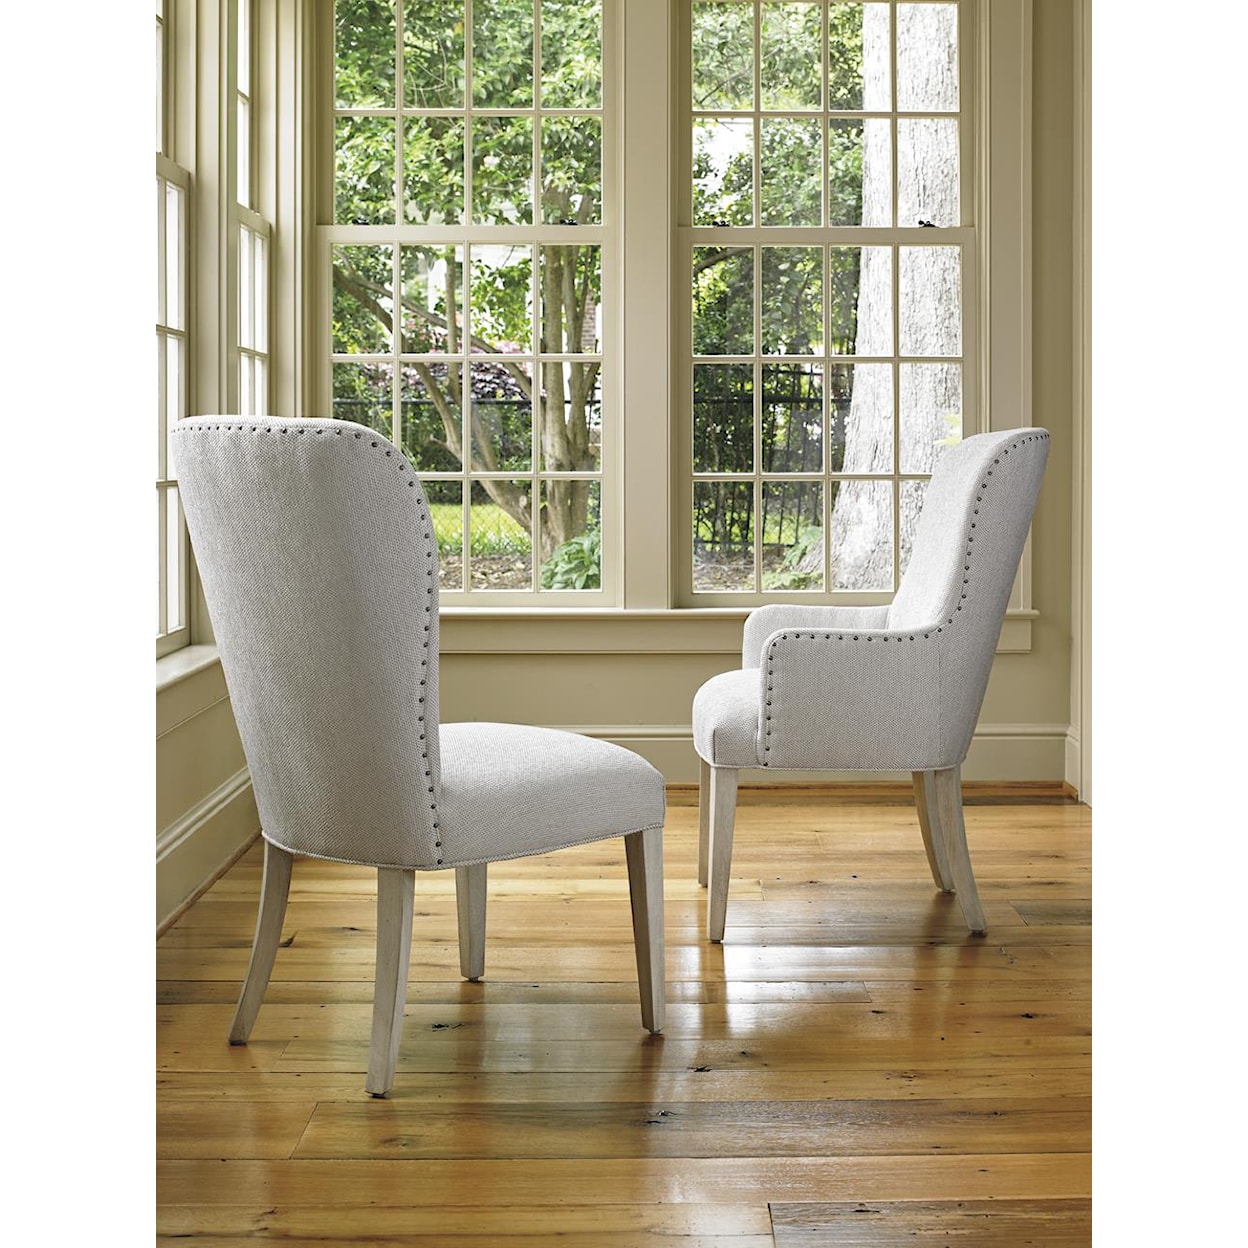 Lexington Oyster Bay BAXTER UPHOLSTERED ARM CHAIR